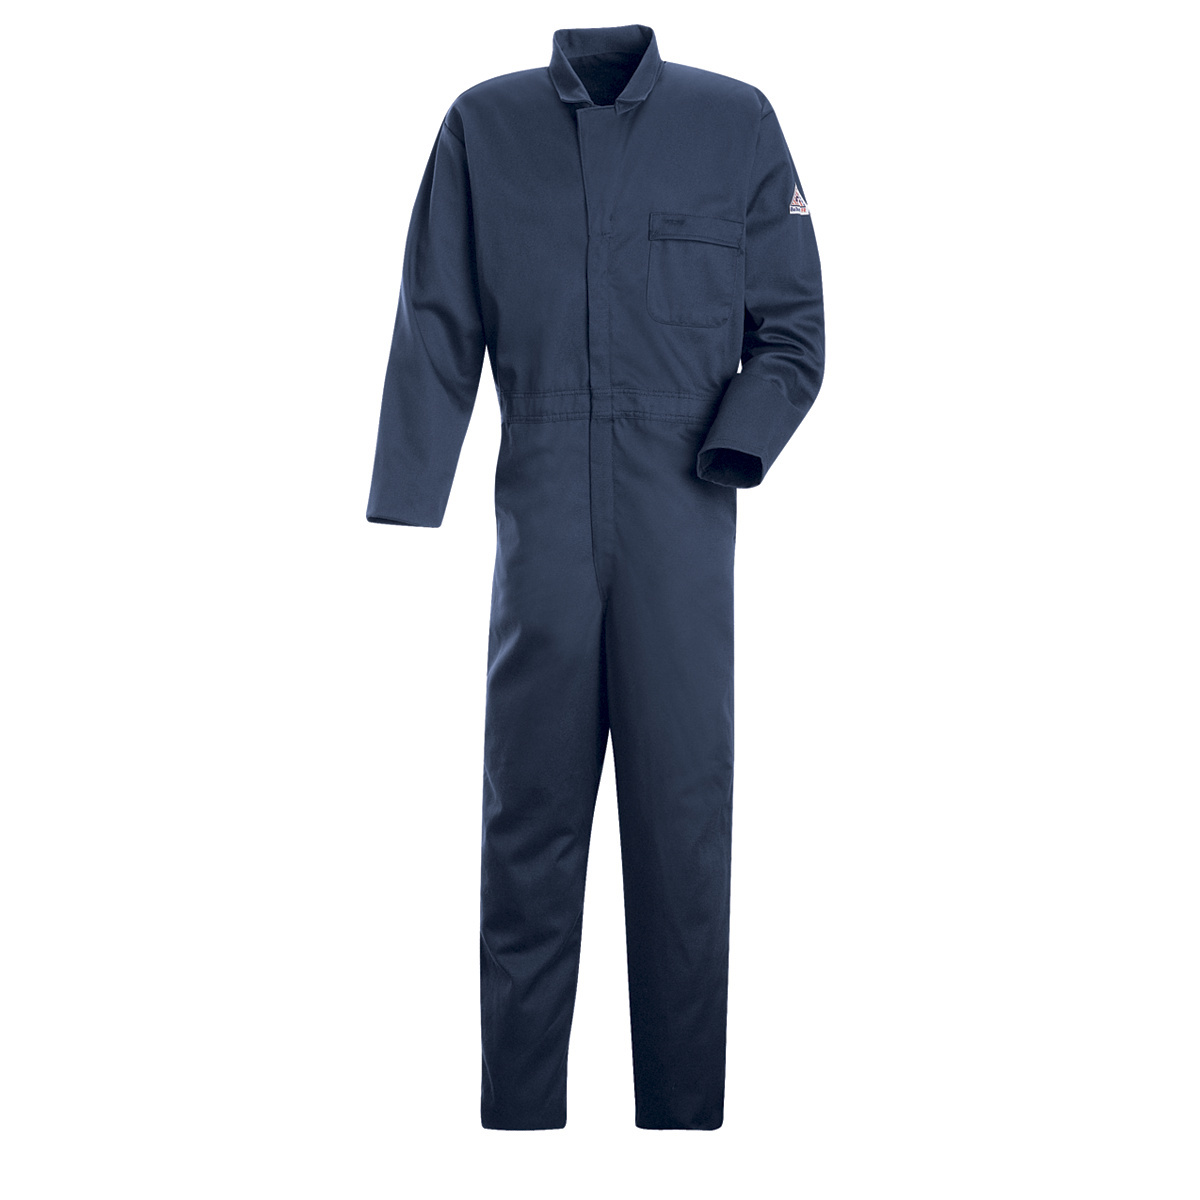 Bulwark® 3X Tall Navy Blue EXCEL FR® Twill Cotton Flame Resistant Coveralls With Zipper Front Closure